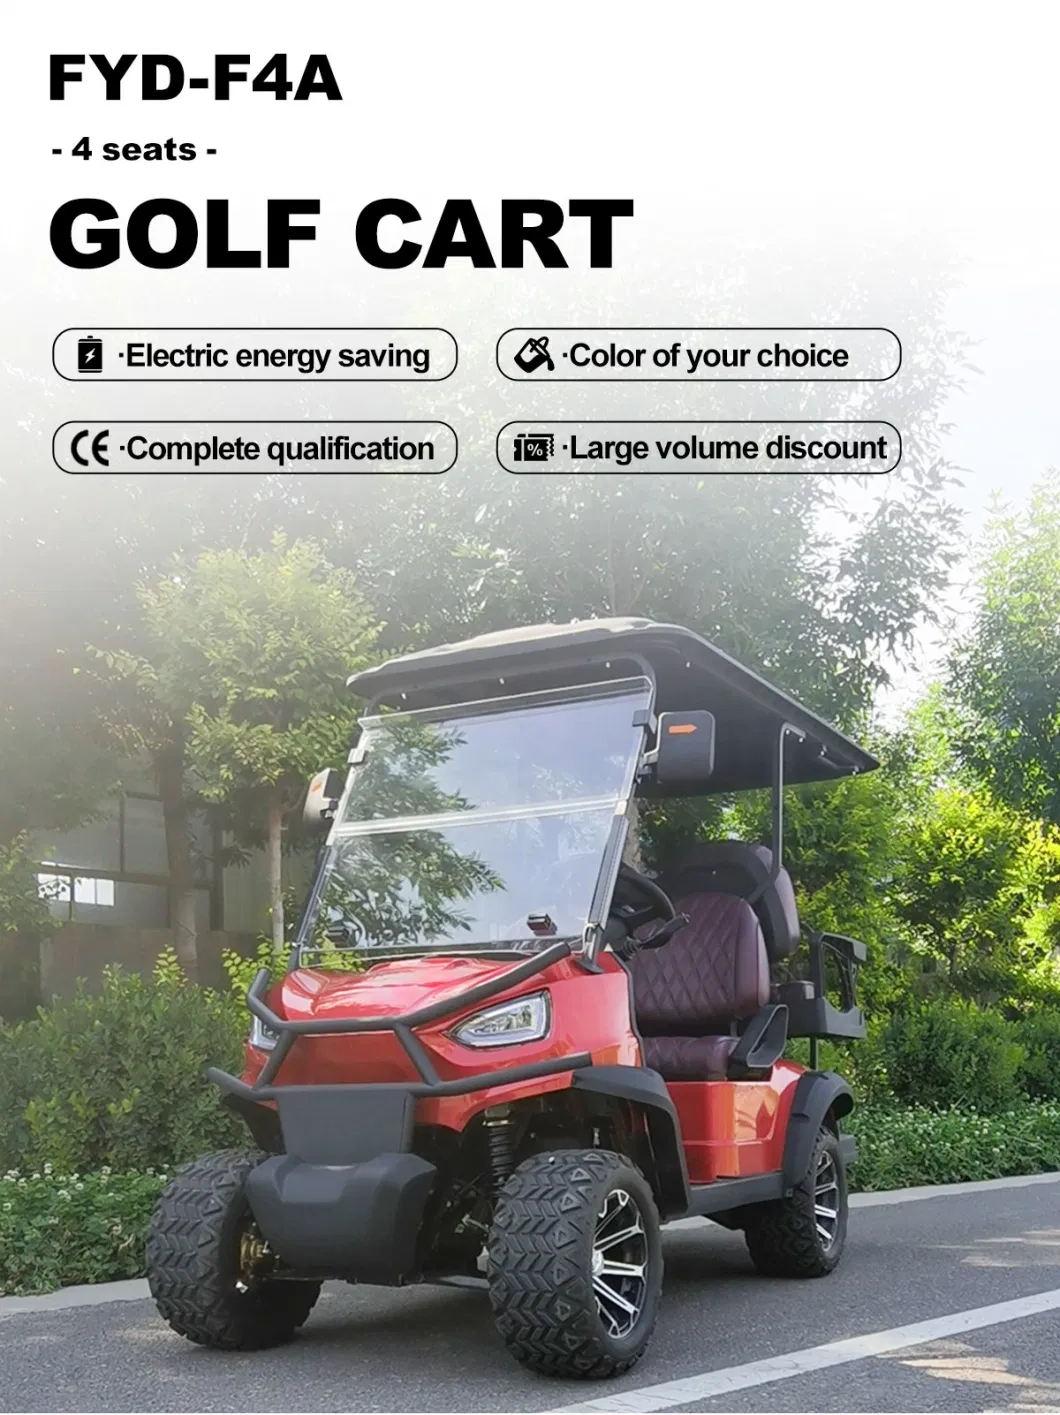 Large Volume Supply Sport Western Style 4 Wheel Red Club Car 4 2 Seater Utility Golf Cart Price for Sale